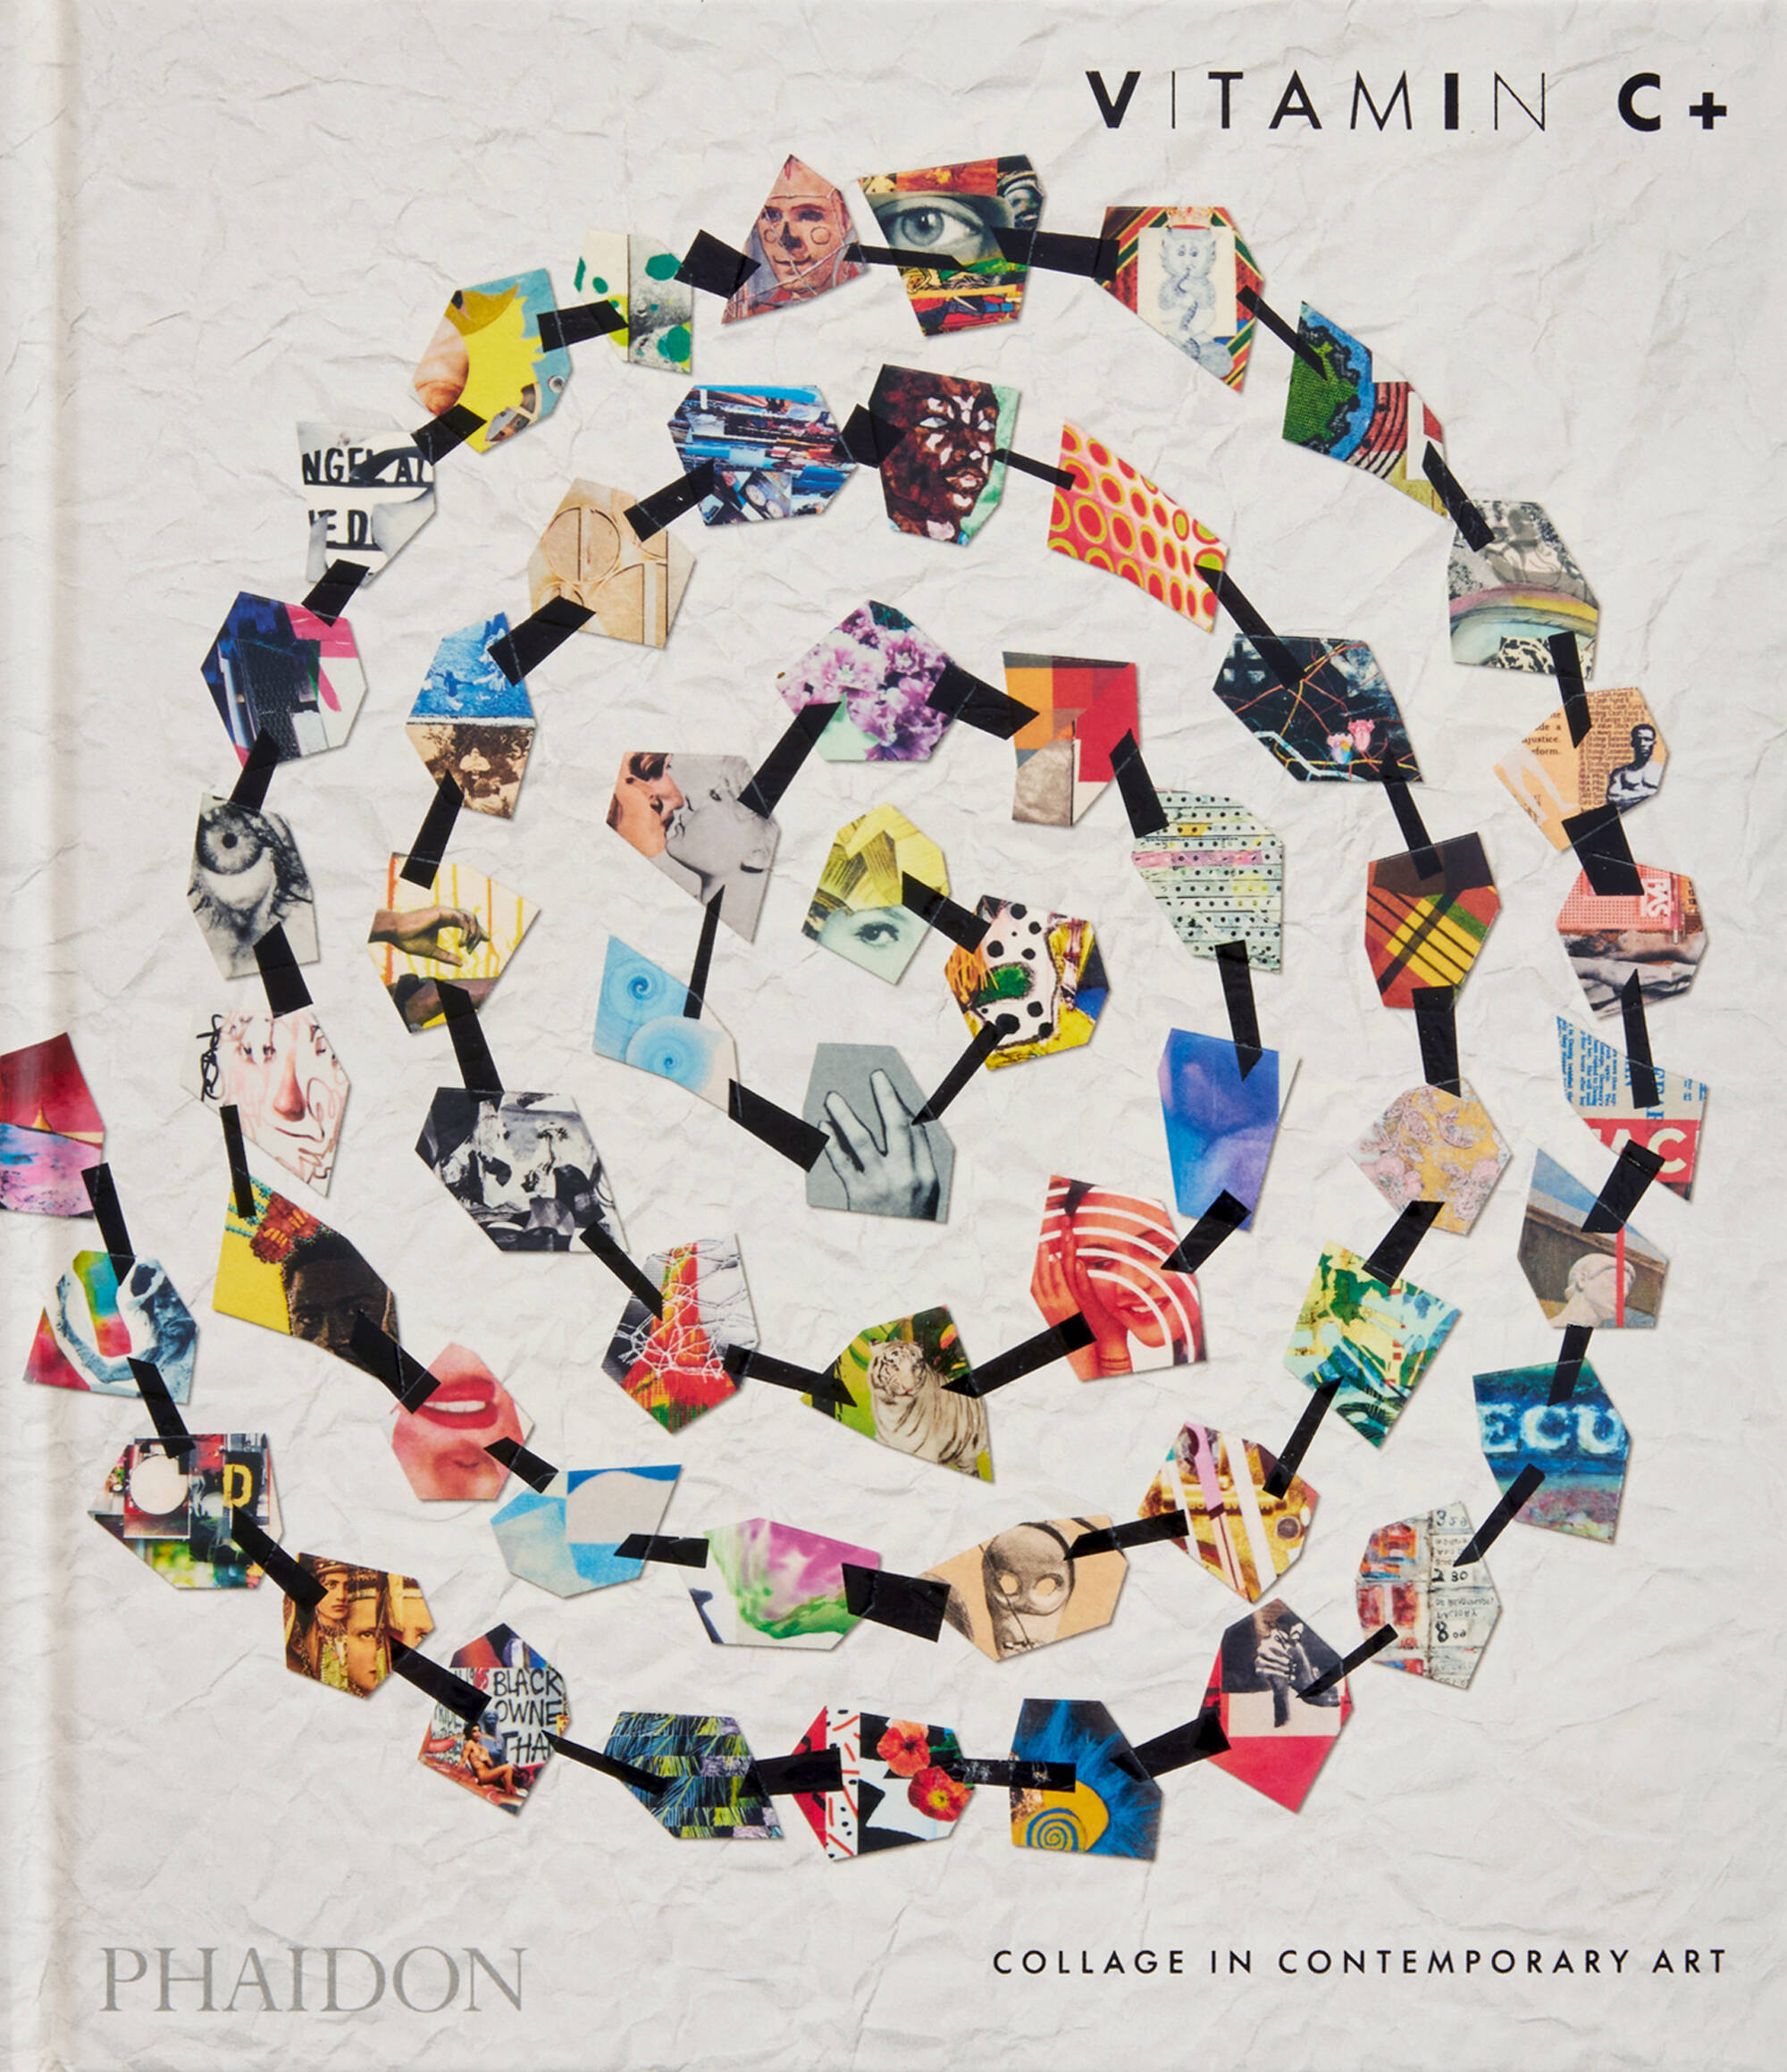 Let's stick together - interviews with collage artists featured in Vitamin C+